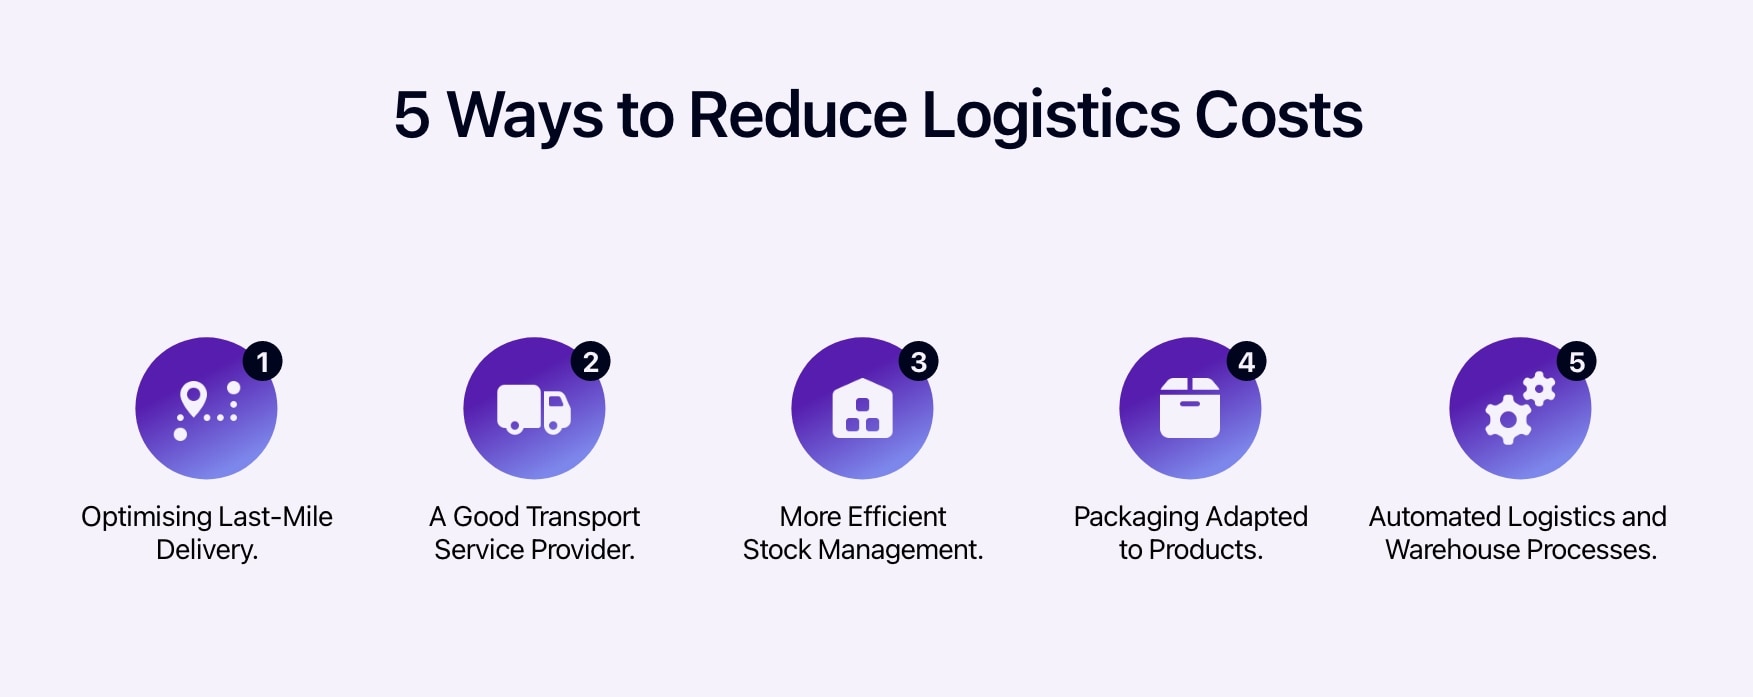 Diagram showing 5 ways to reduce logistics costs.